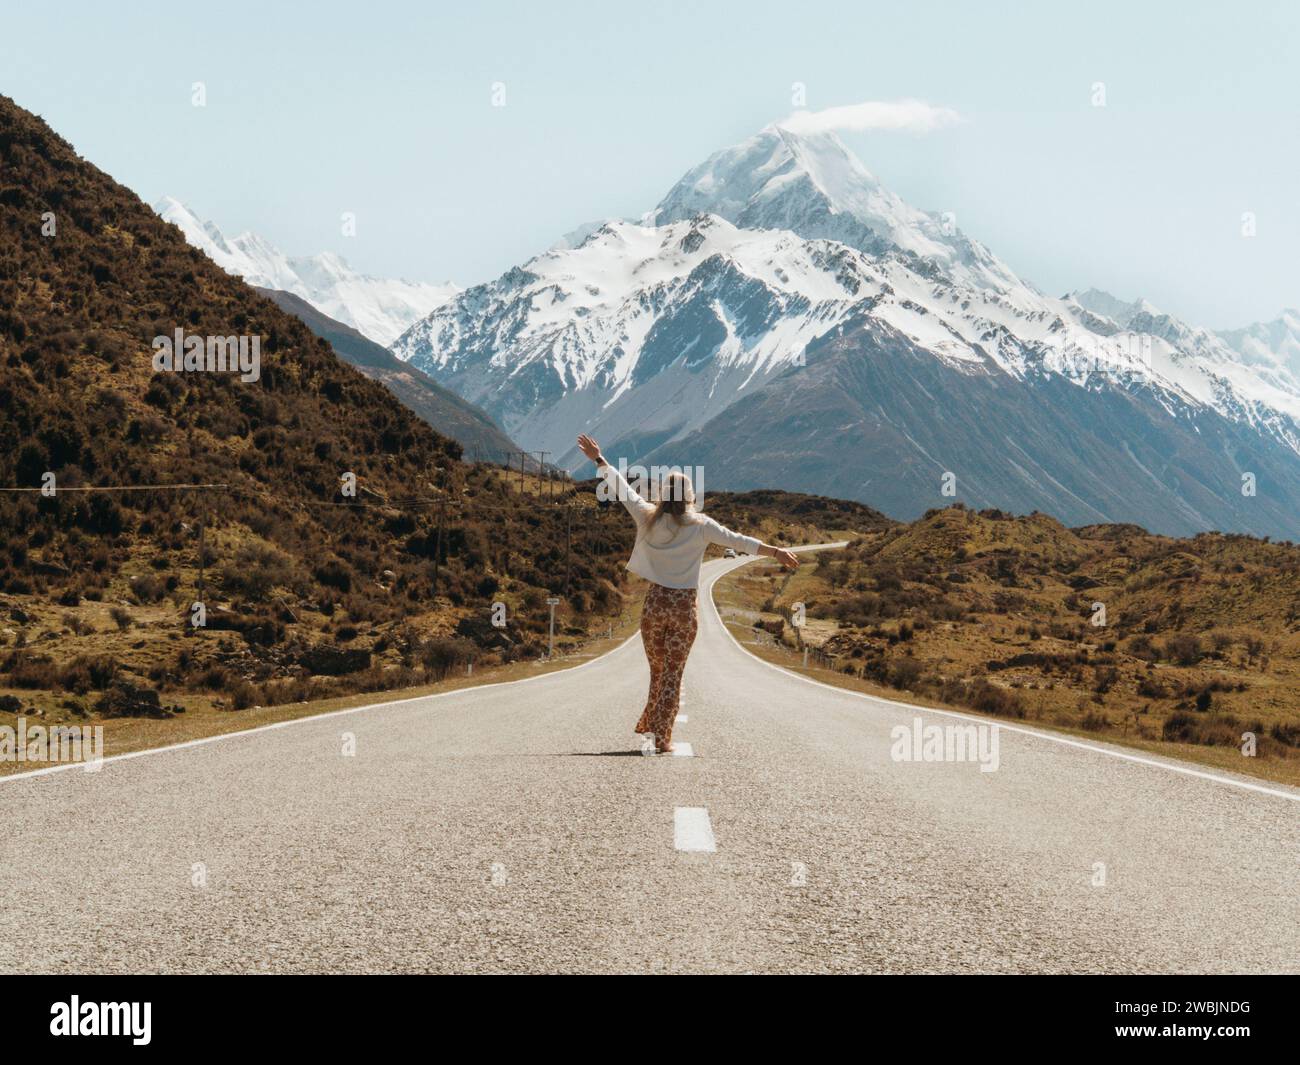 Carefree girl walking on the road to Mt Cook, New Zealand wearing bohemian clothing. Stock Photo